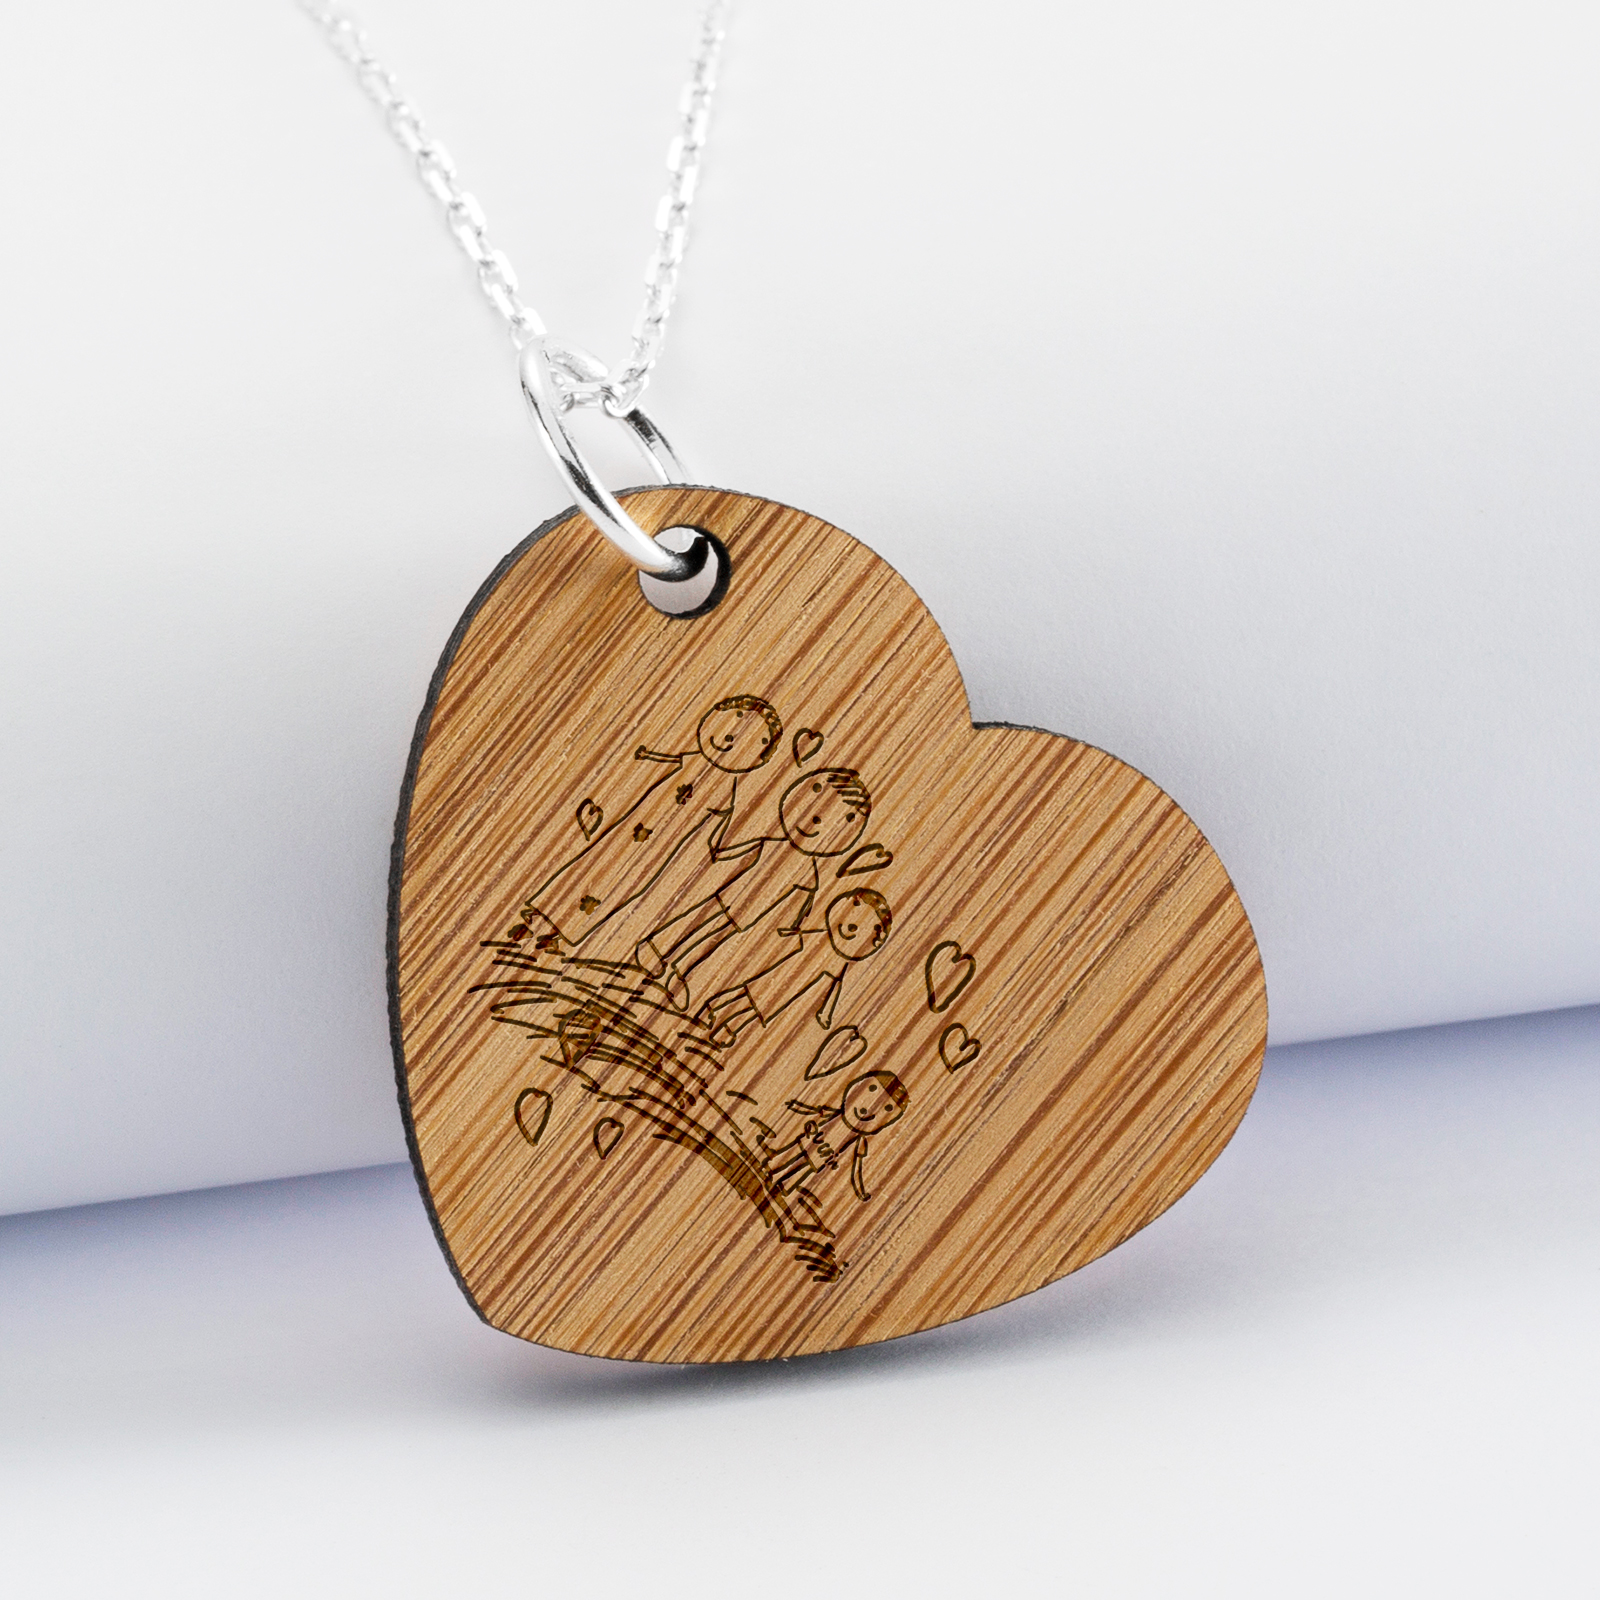 Personalised heart wooden engraved medallion pendant 33x30mm - sketch